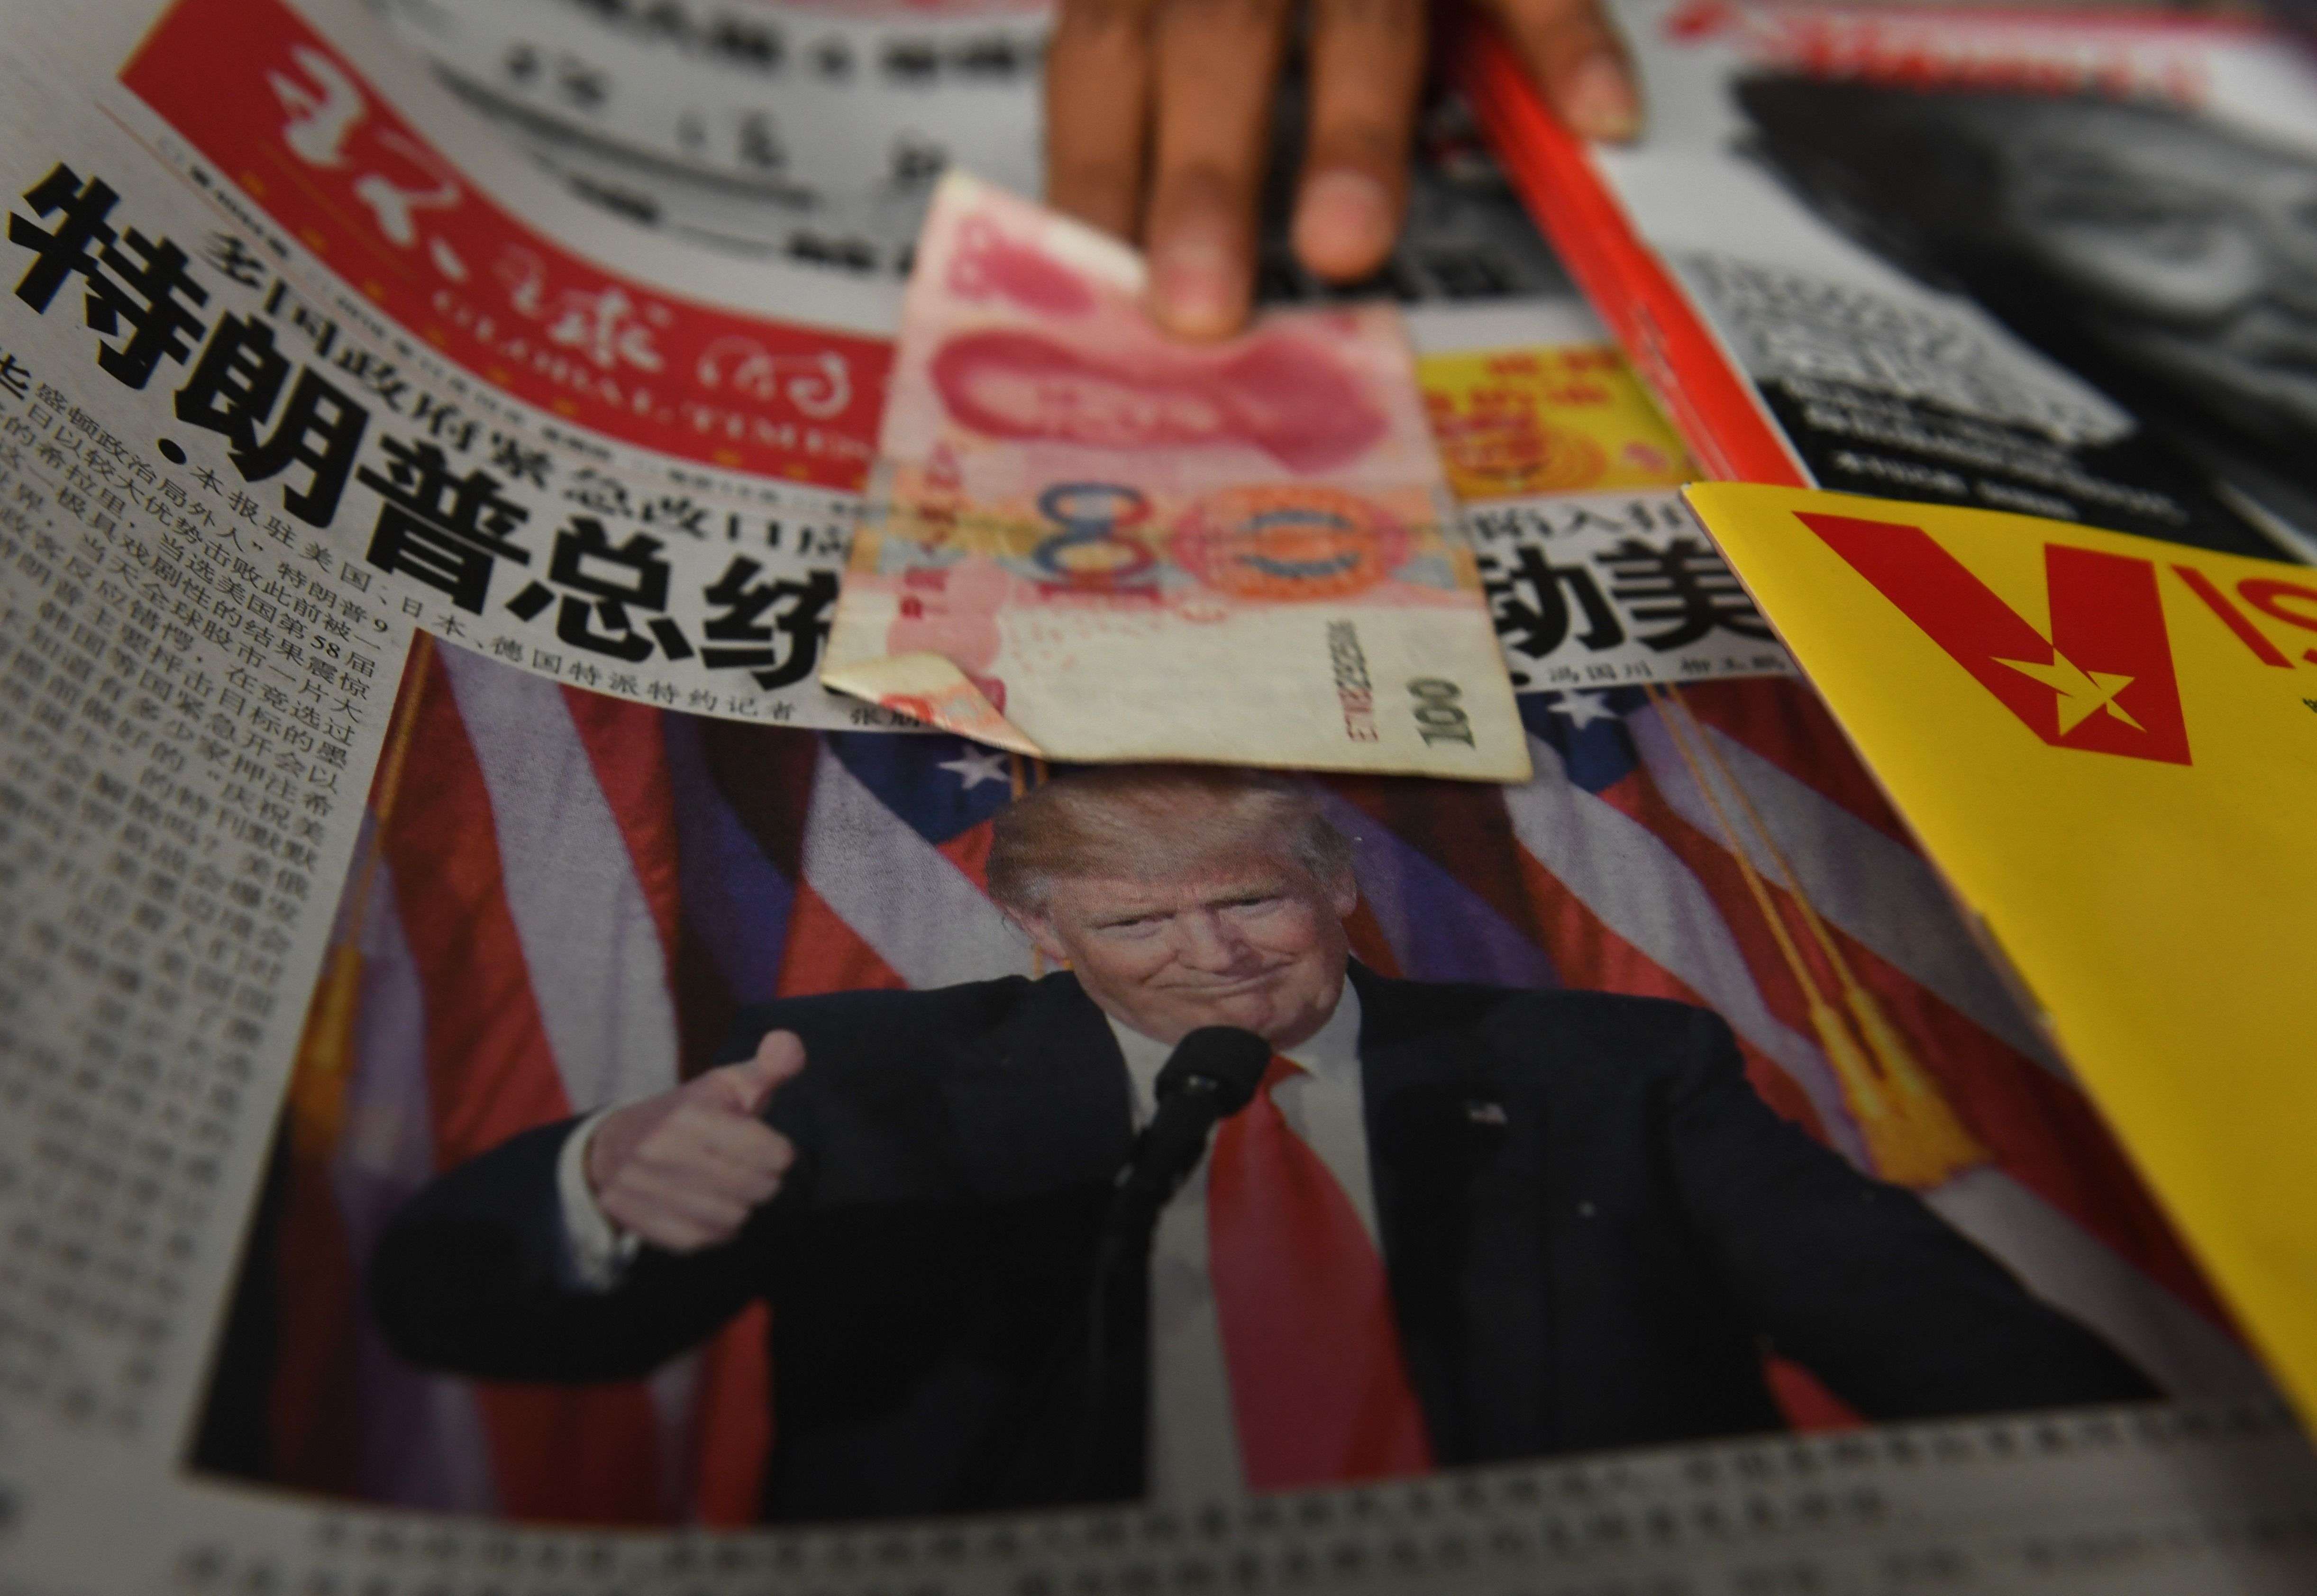 A vendor picks up a 100 yuan note above a newspaper featuring a photo of US president-elect Donald Trump, at a news stand in Beijing. Photo: AFP